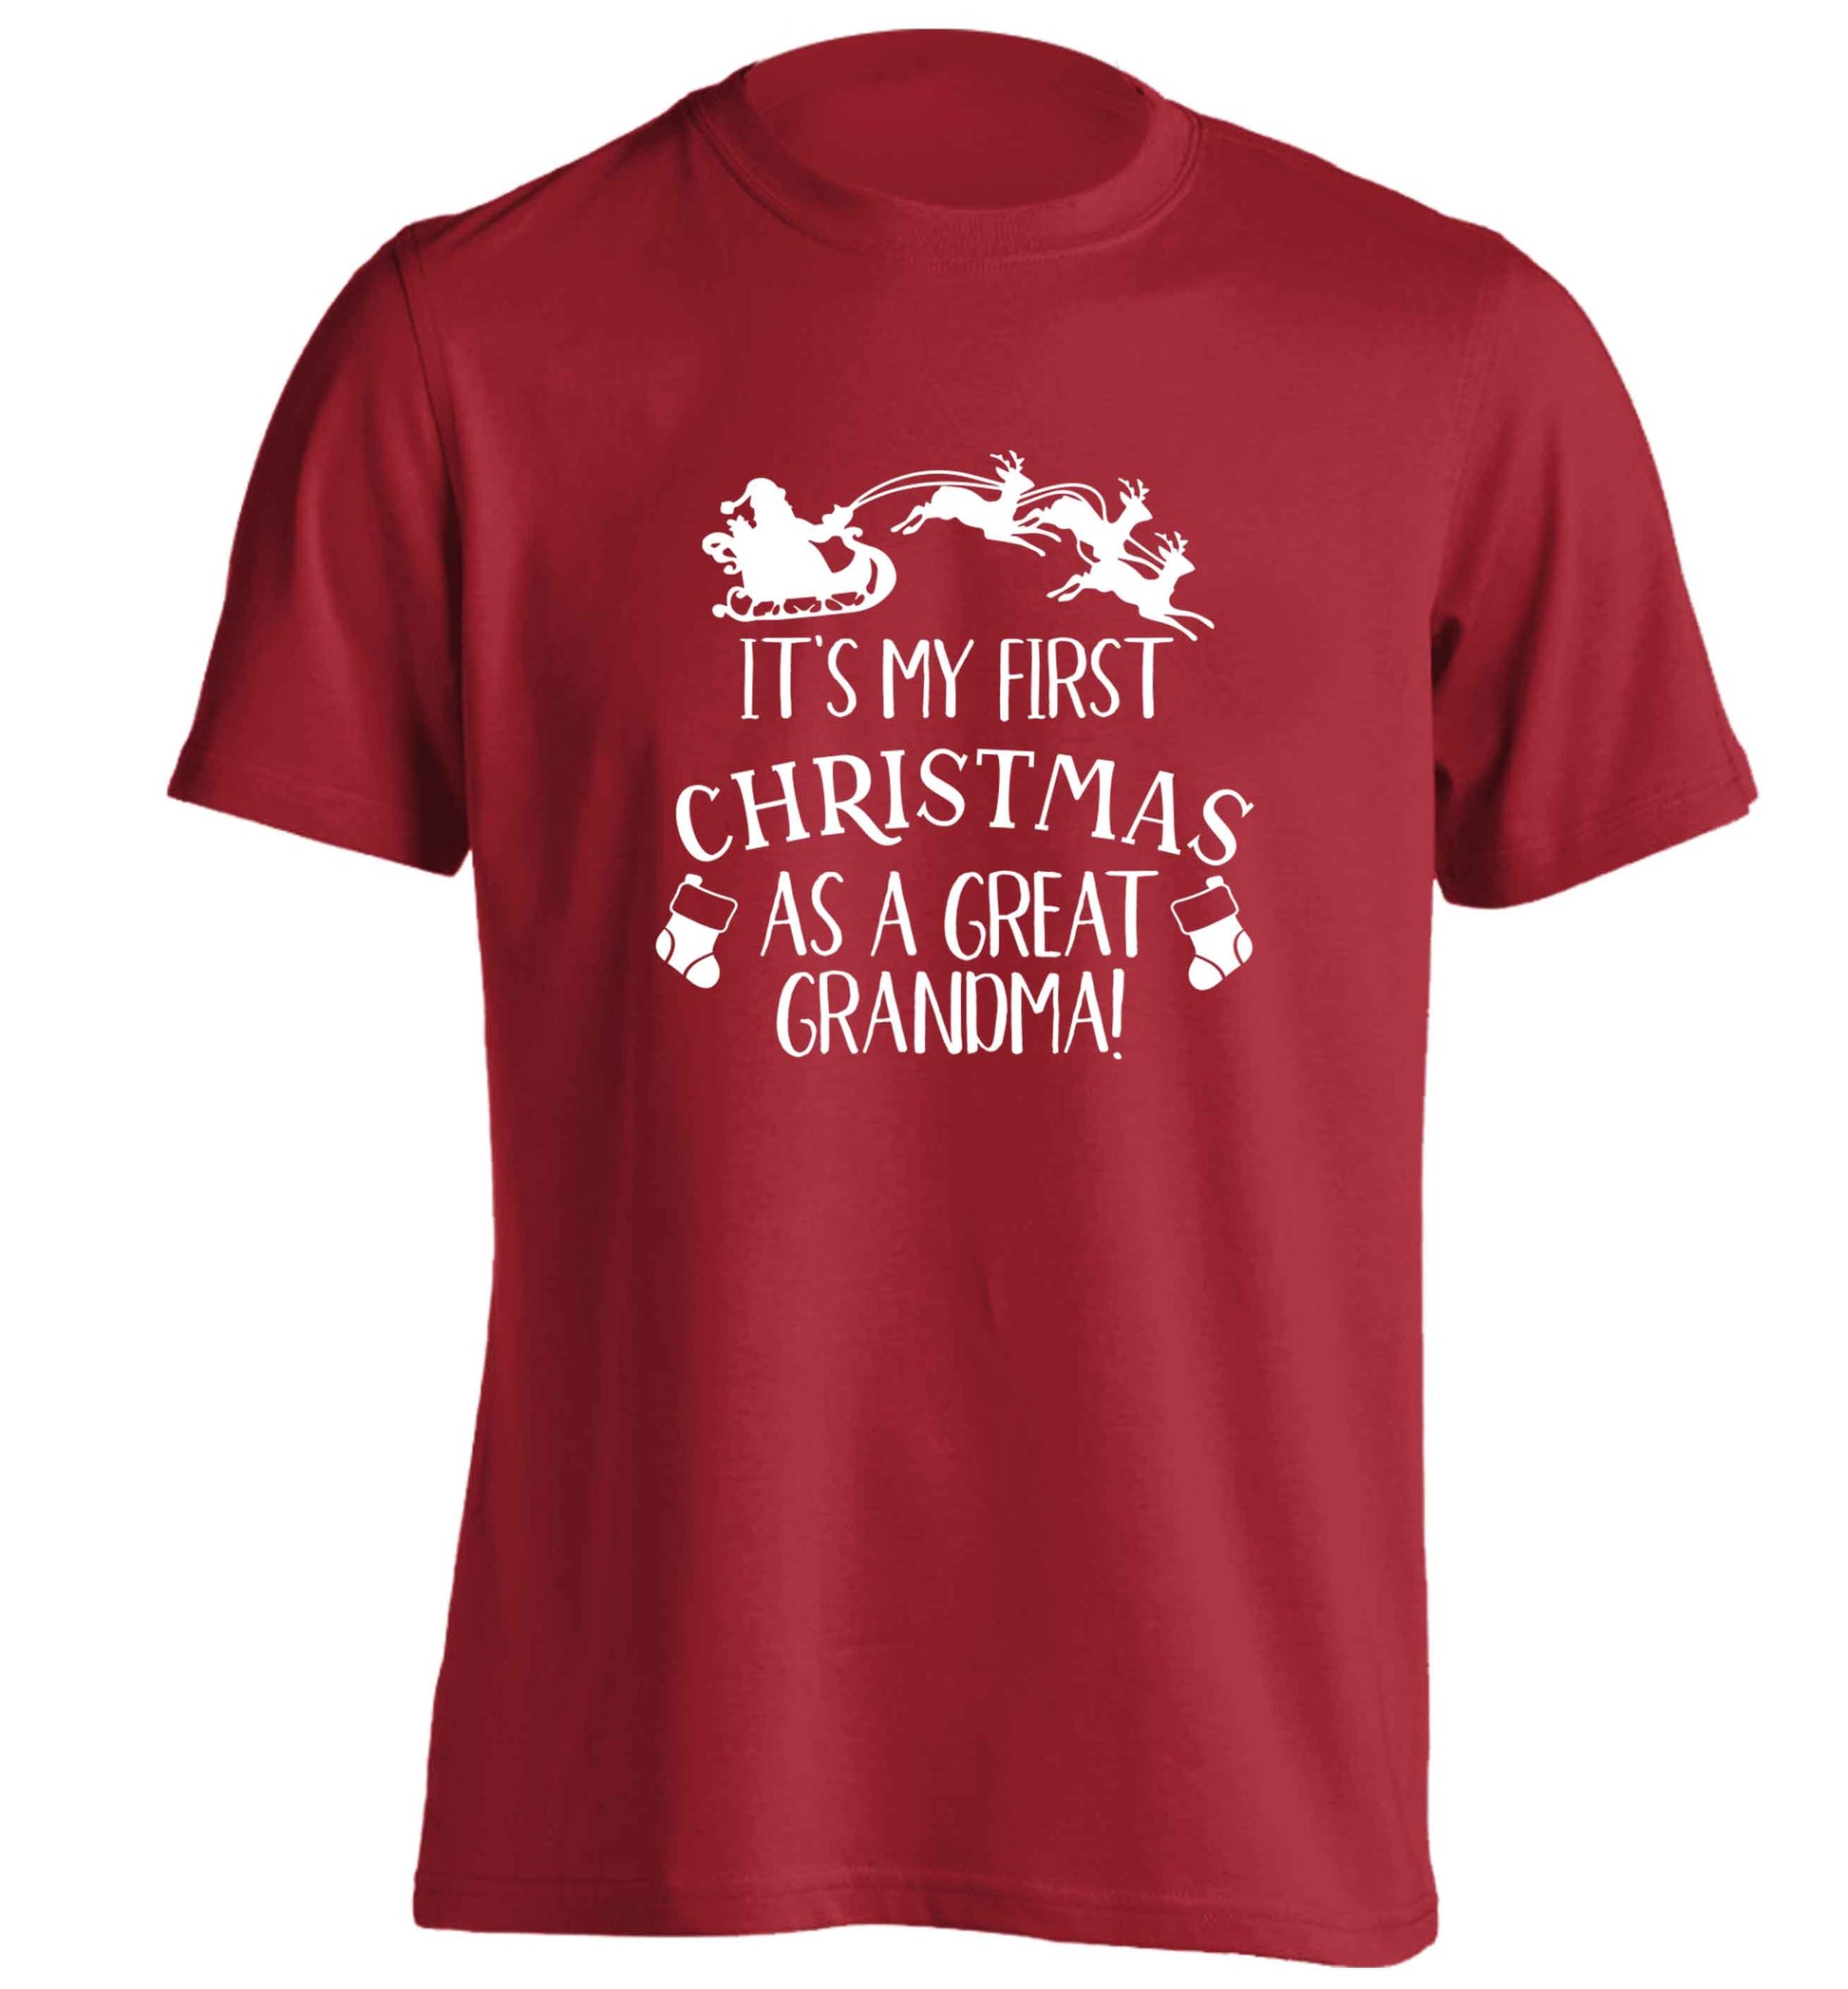 It's my first Christmas as a great grandma! adults unisex red Tshirt 2XL